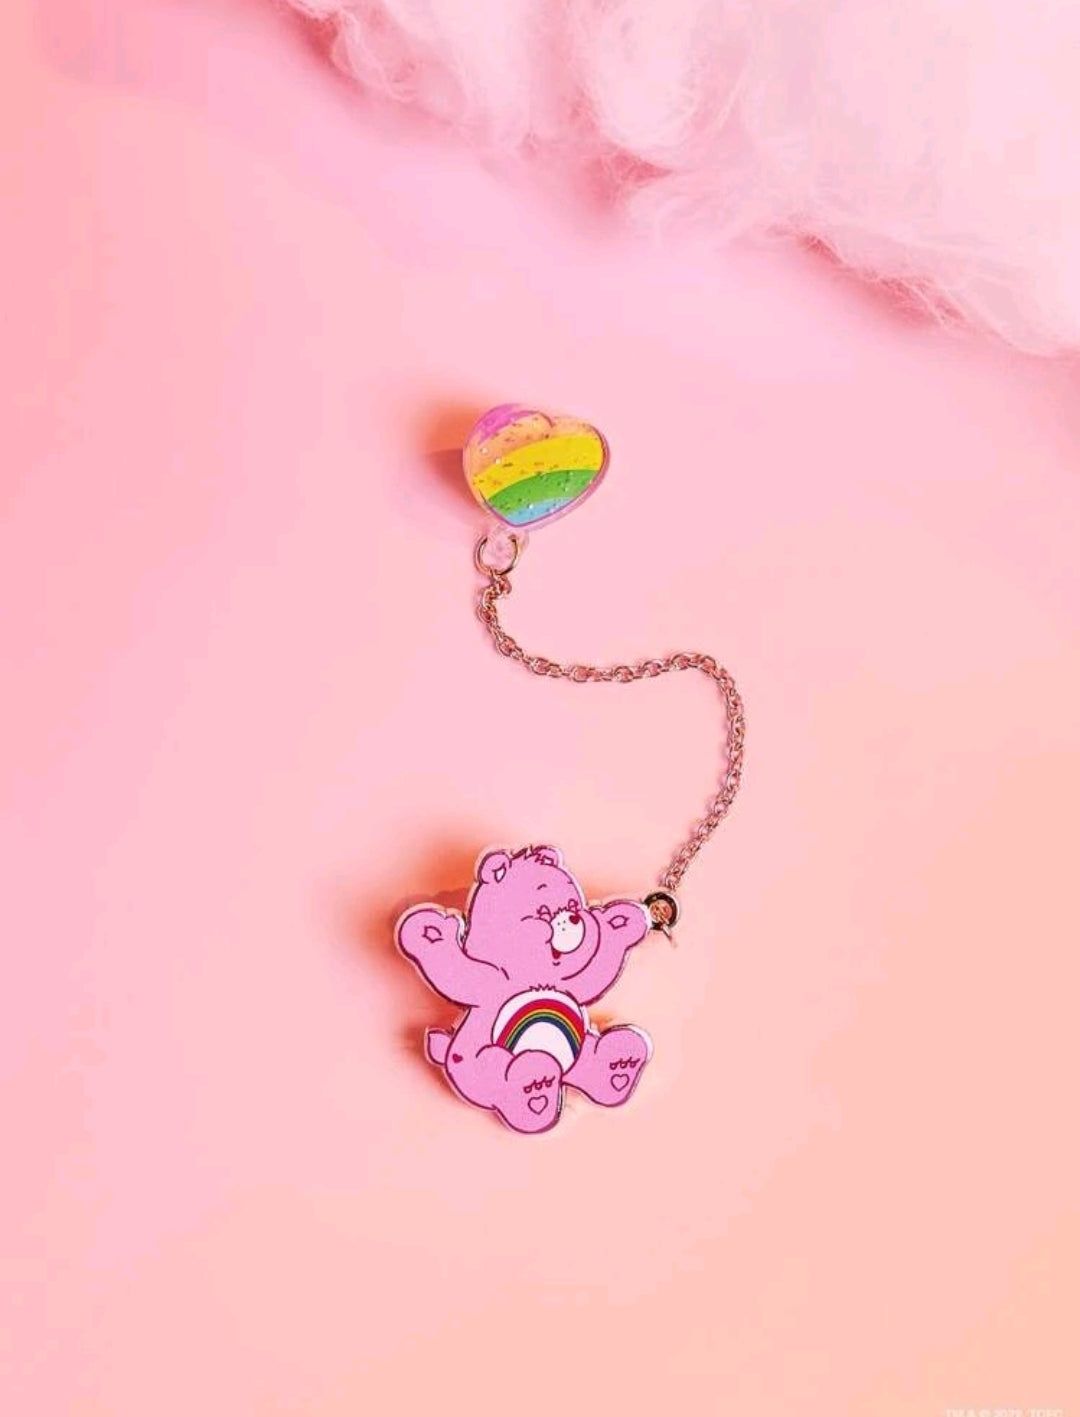 A Care Bear enamel pin in pink with a rainbow heart. - Care Bears